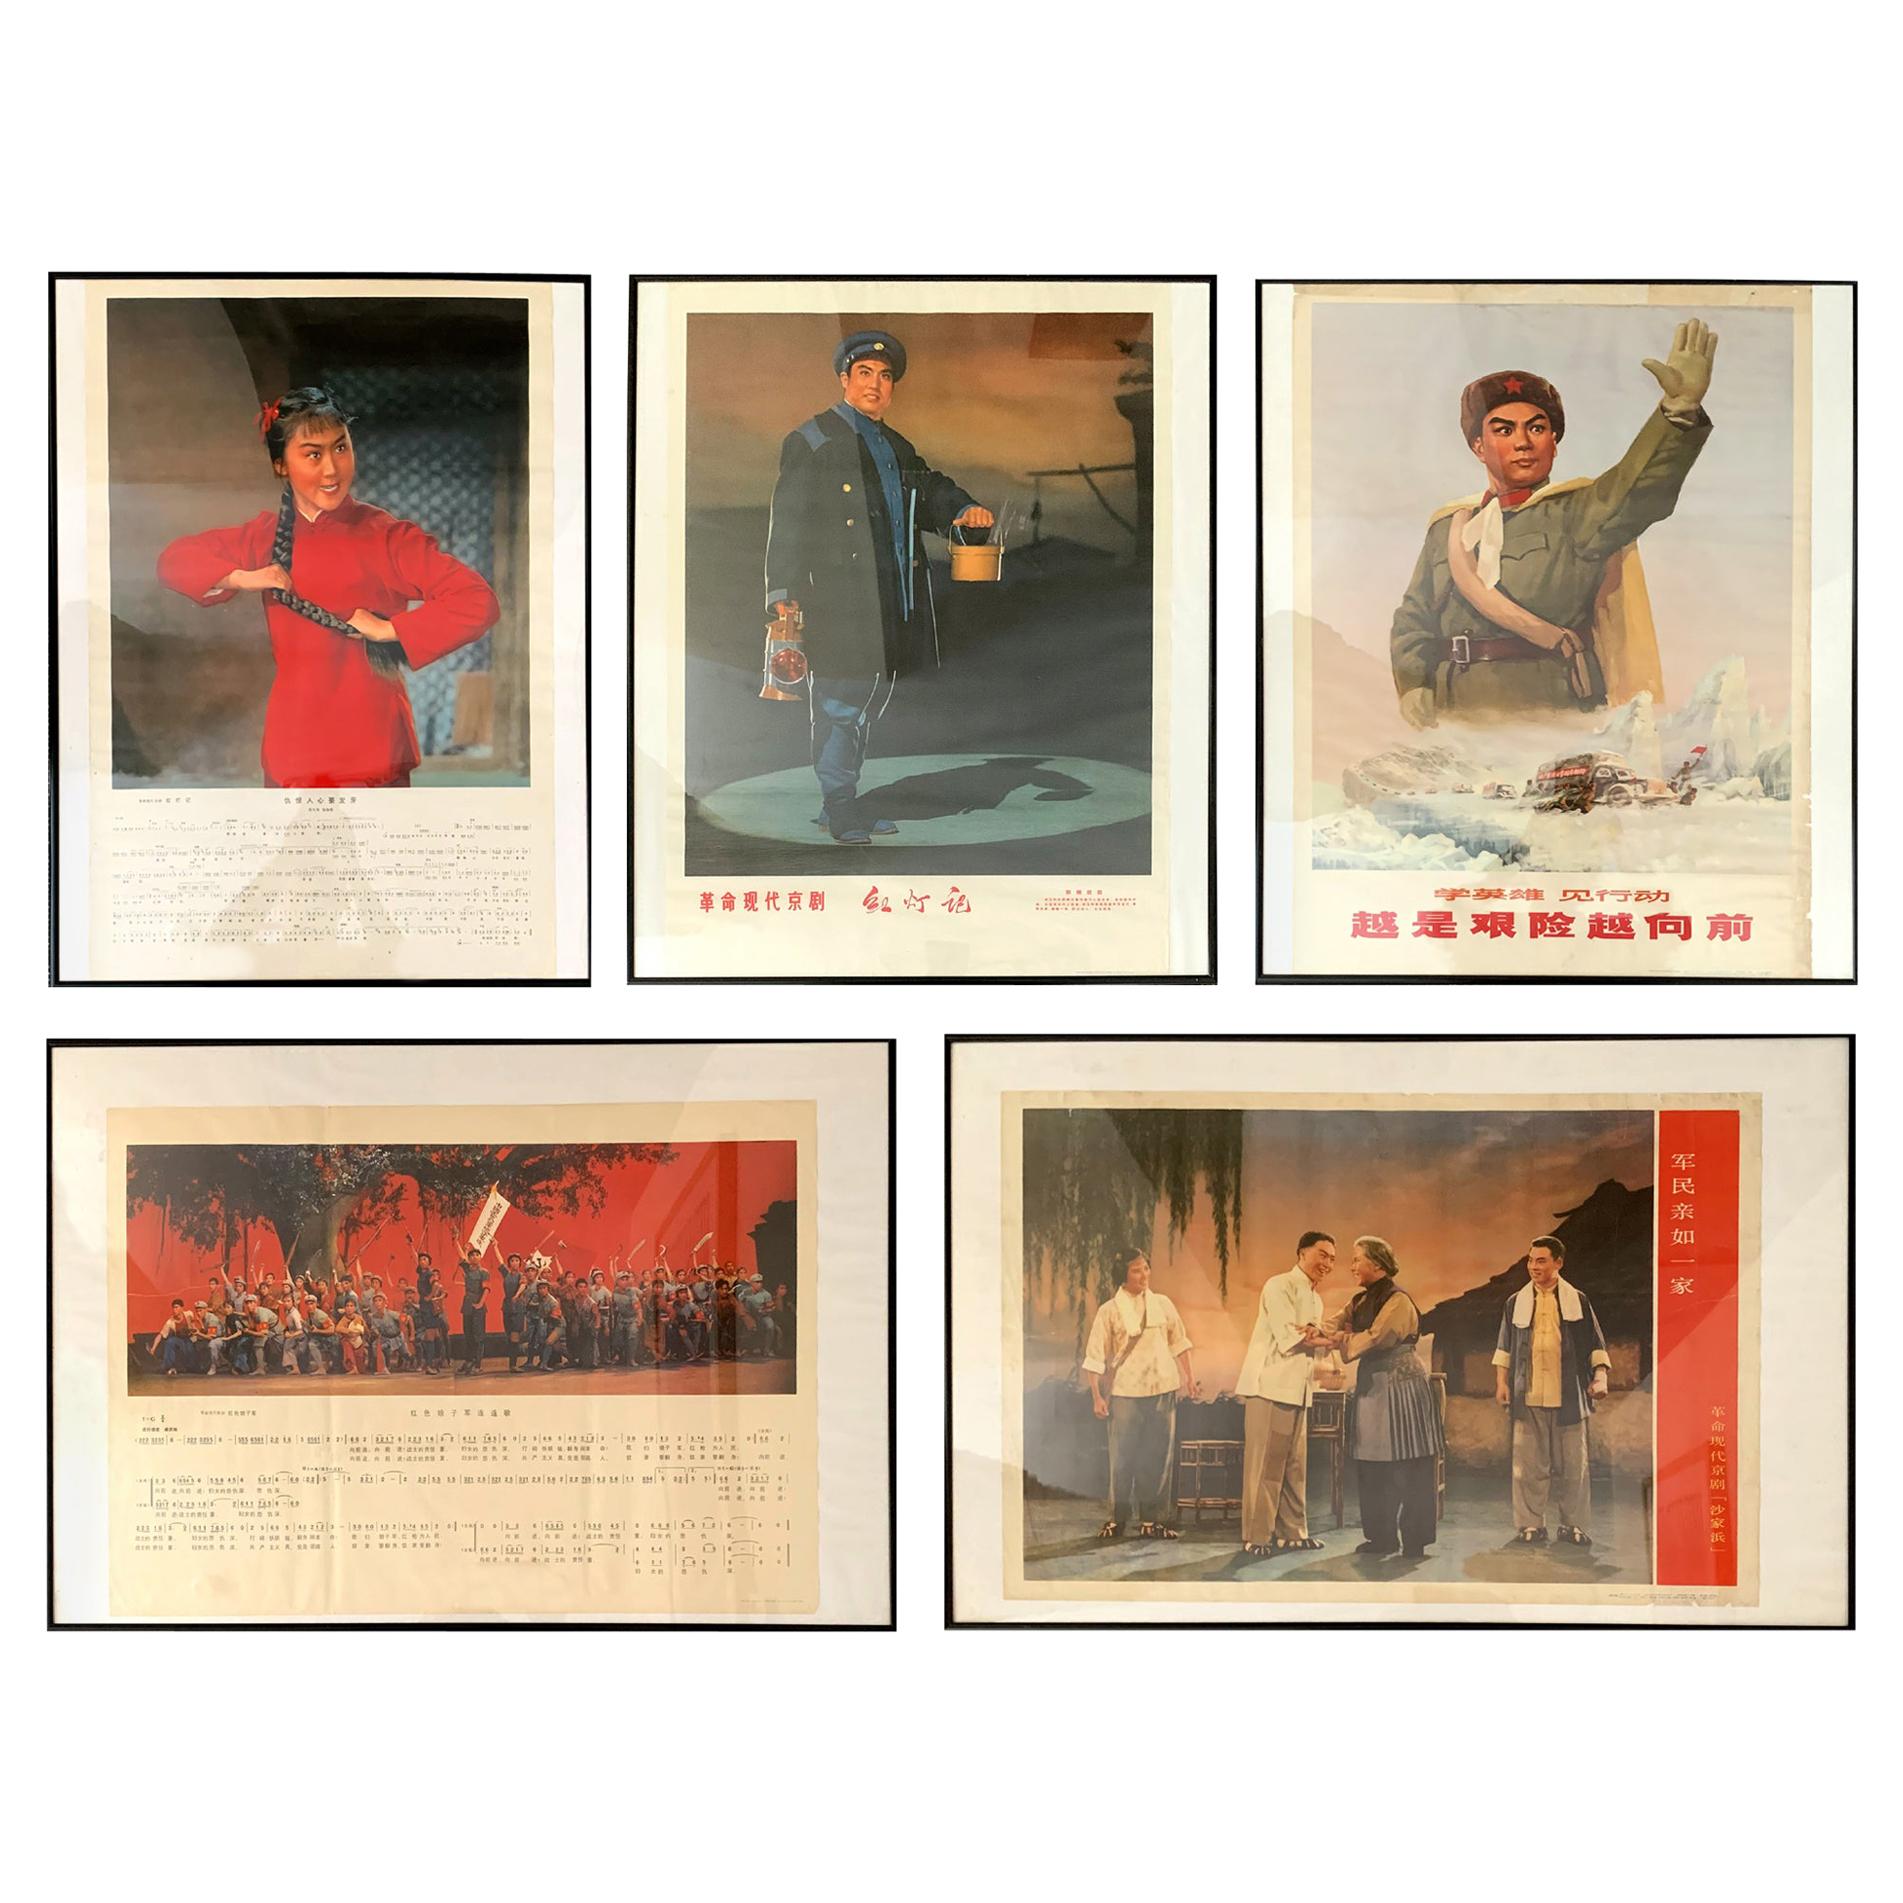 Collection of Five Chinese Posters from the Cultural Revolution